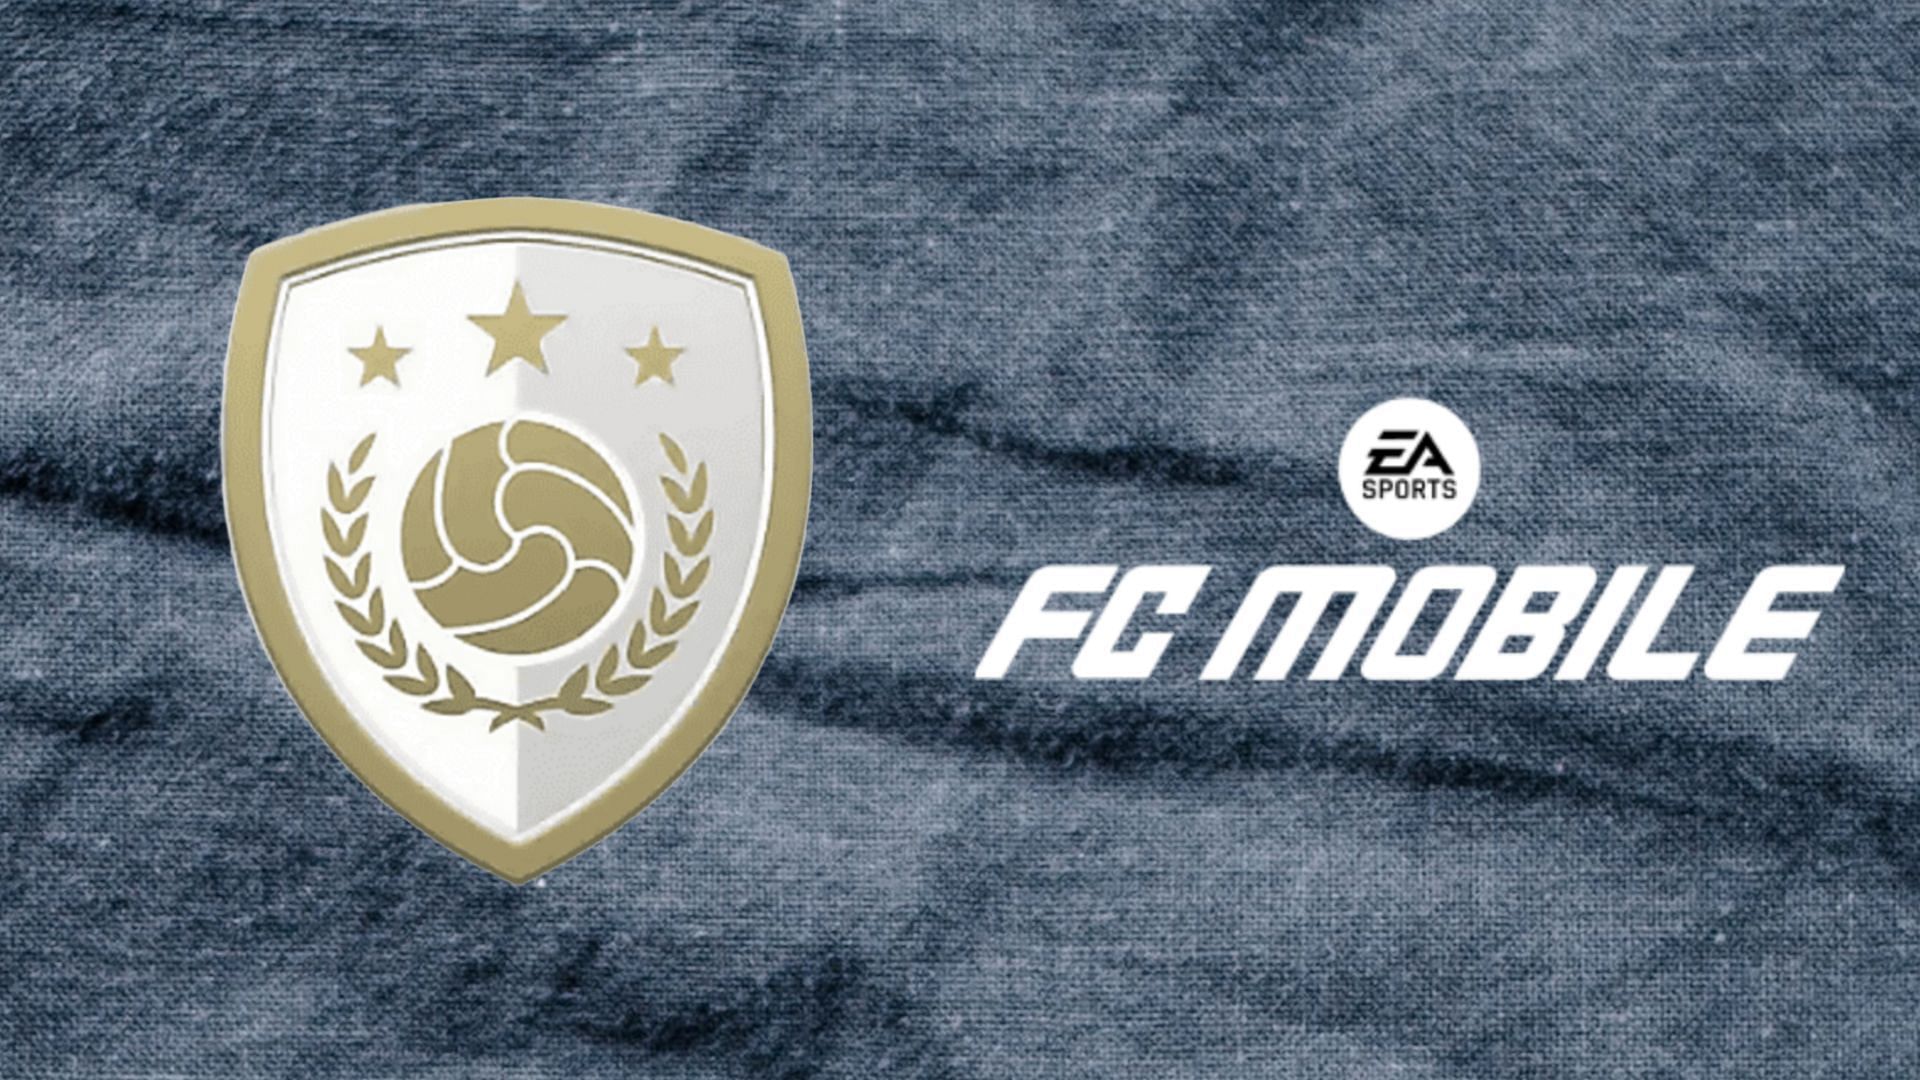 Garrincha and Socrates will feature as Icons in Welcome to EA FC Mobile event (Image via Sportskeeda) 